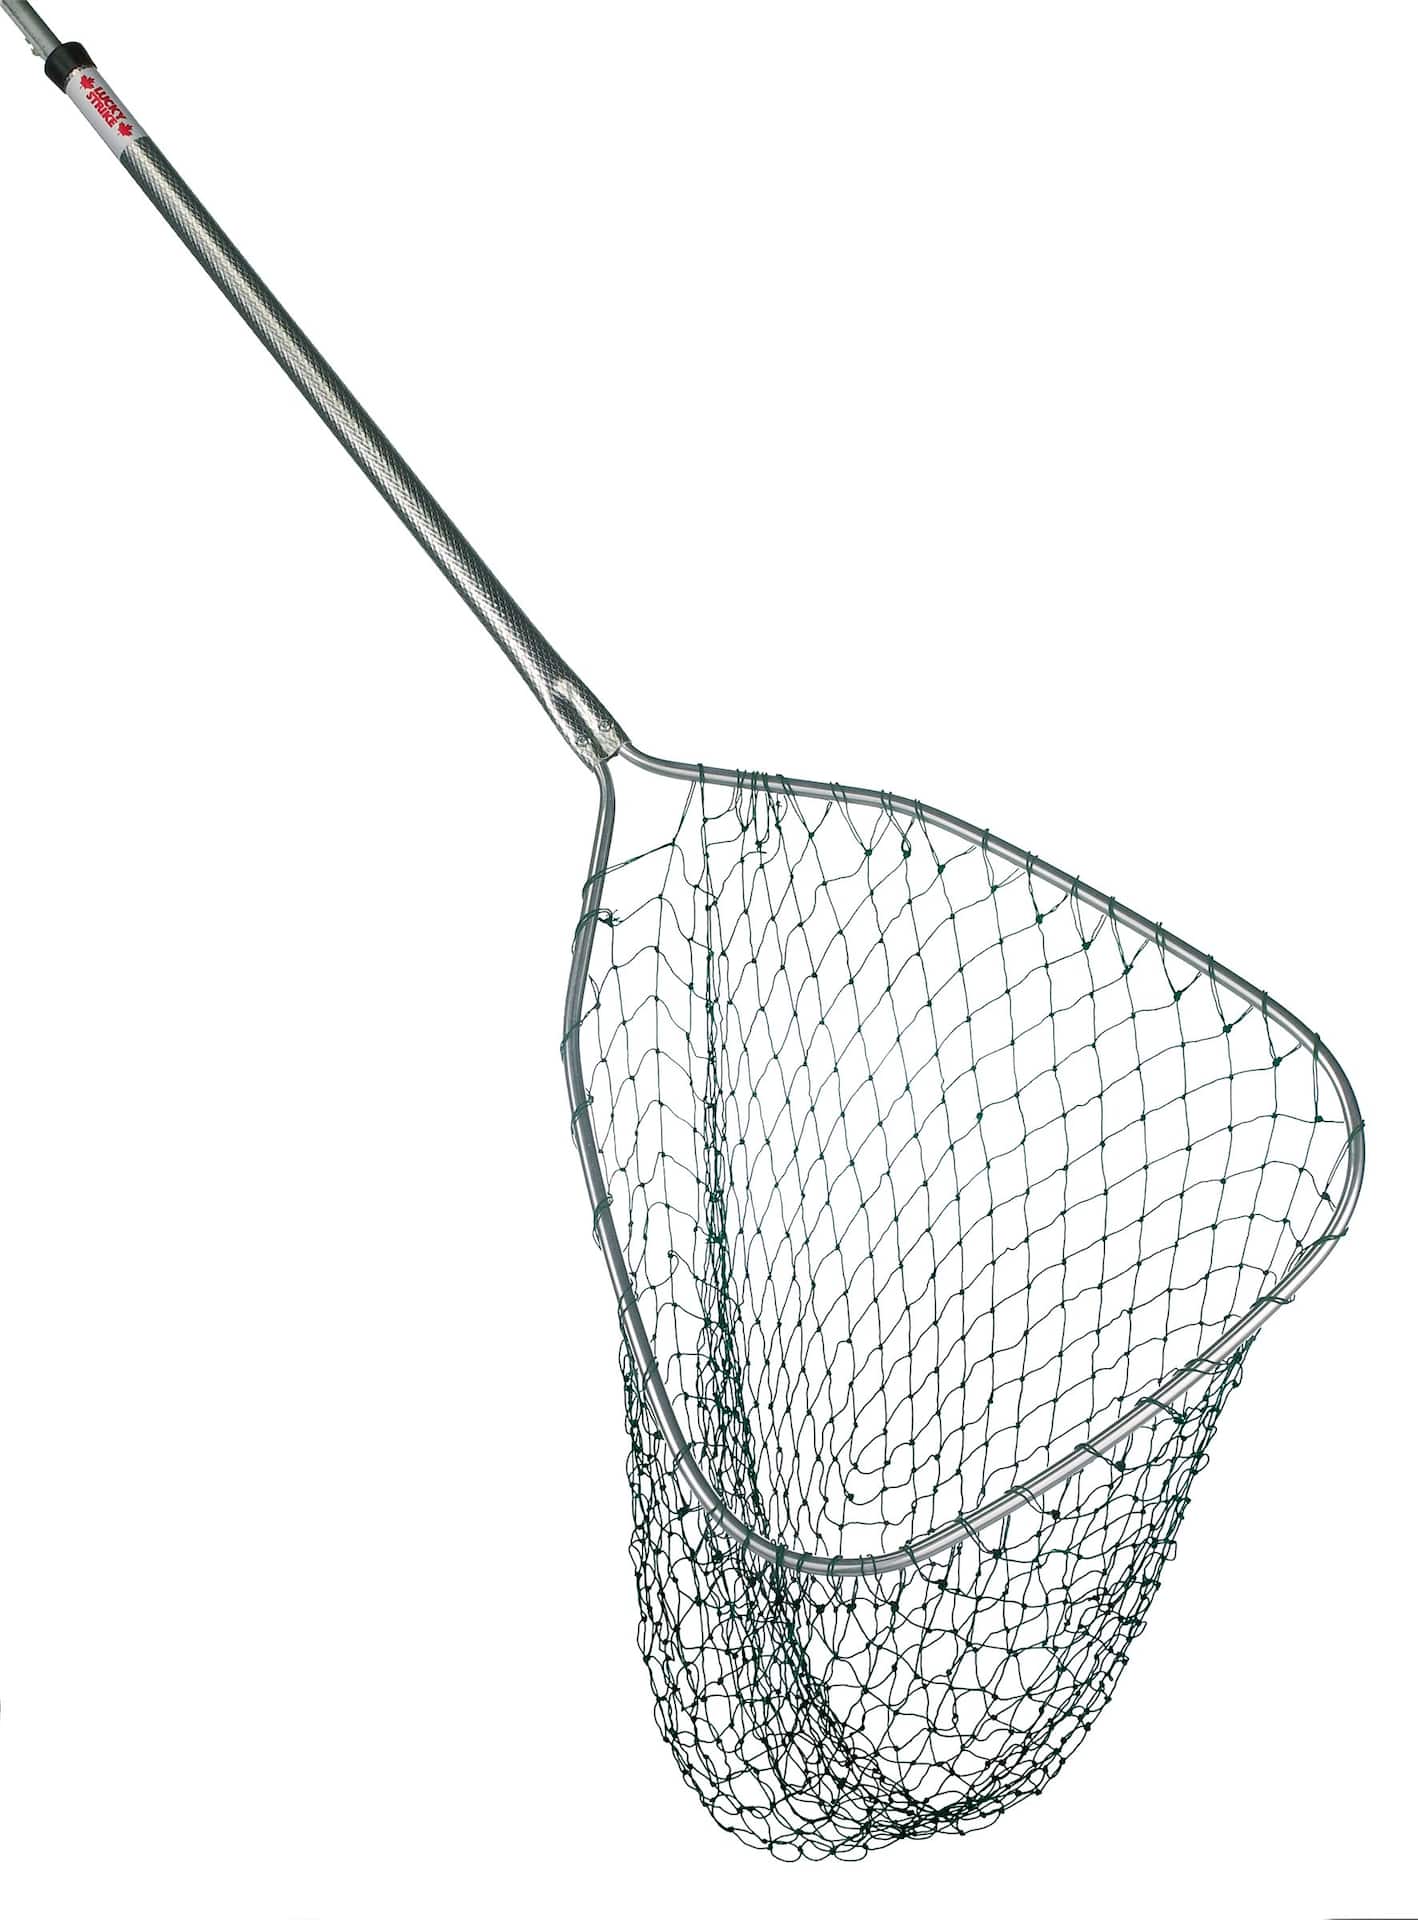 https://media-www.canadiantire.ca/product/playing/fishing/fishing-accessories/0784053/lucky-strike-economy-boat-net-24--c761e2d5-9bca-45b8-84de-f3c63578a5af-jpgrendition.jpg